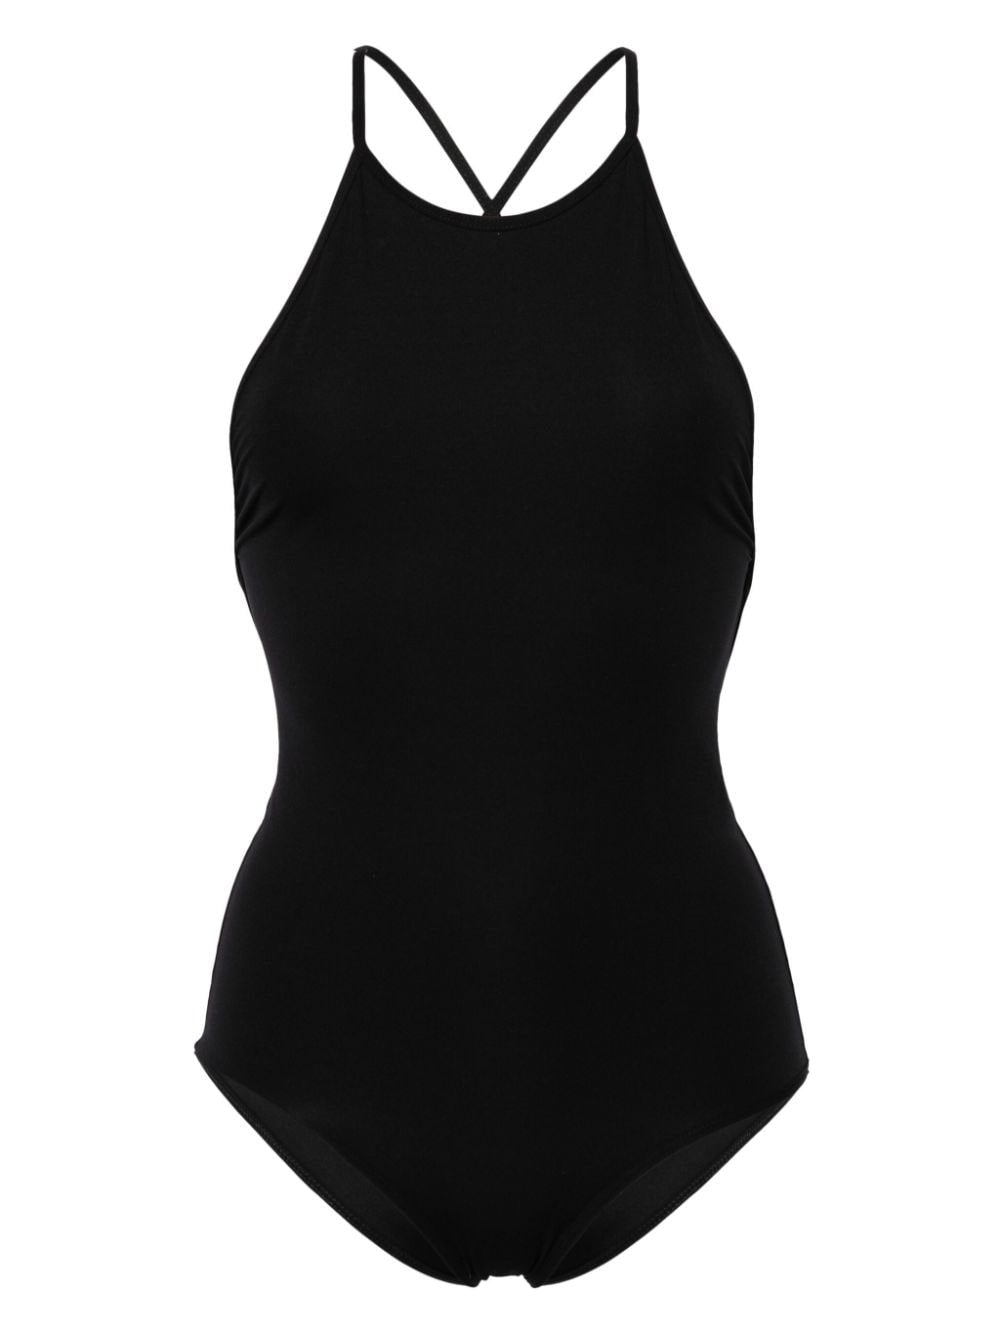 TOTEME-High Neck Swimsuit-